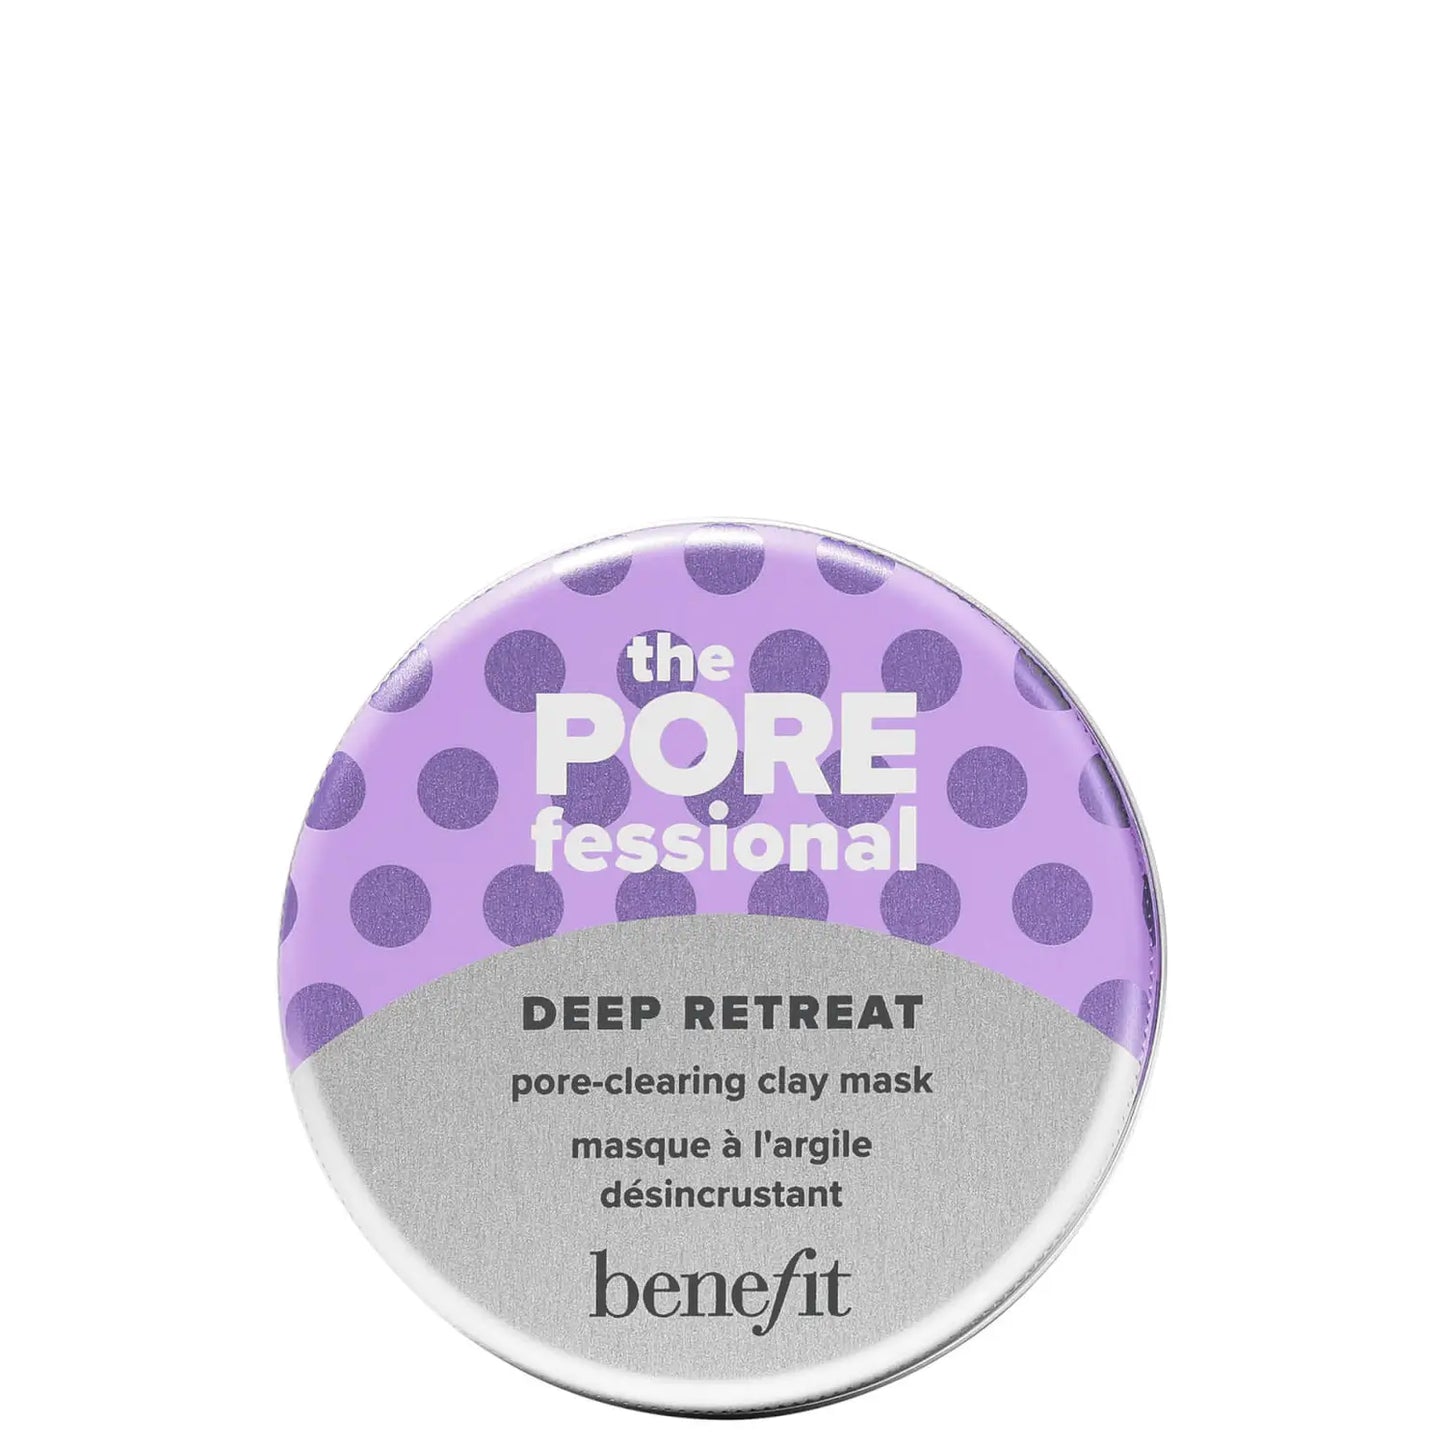 BENEFIT The Porefessional Deep Retreat Pore-Clearing Clay Mask, 30 ml